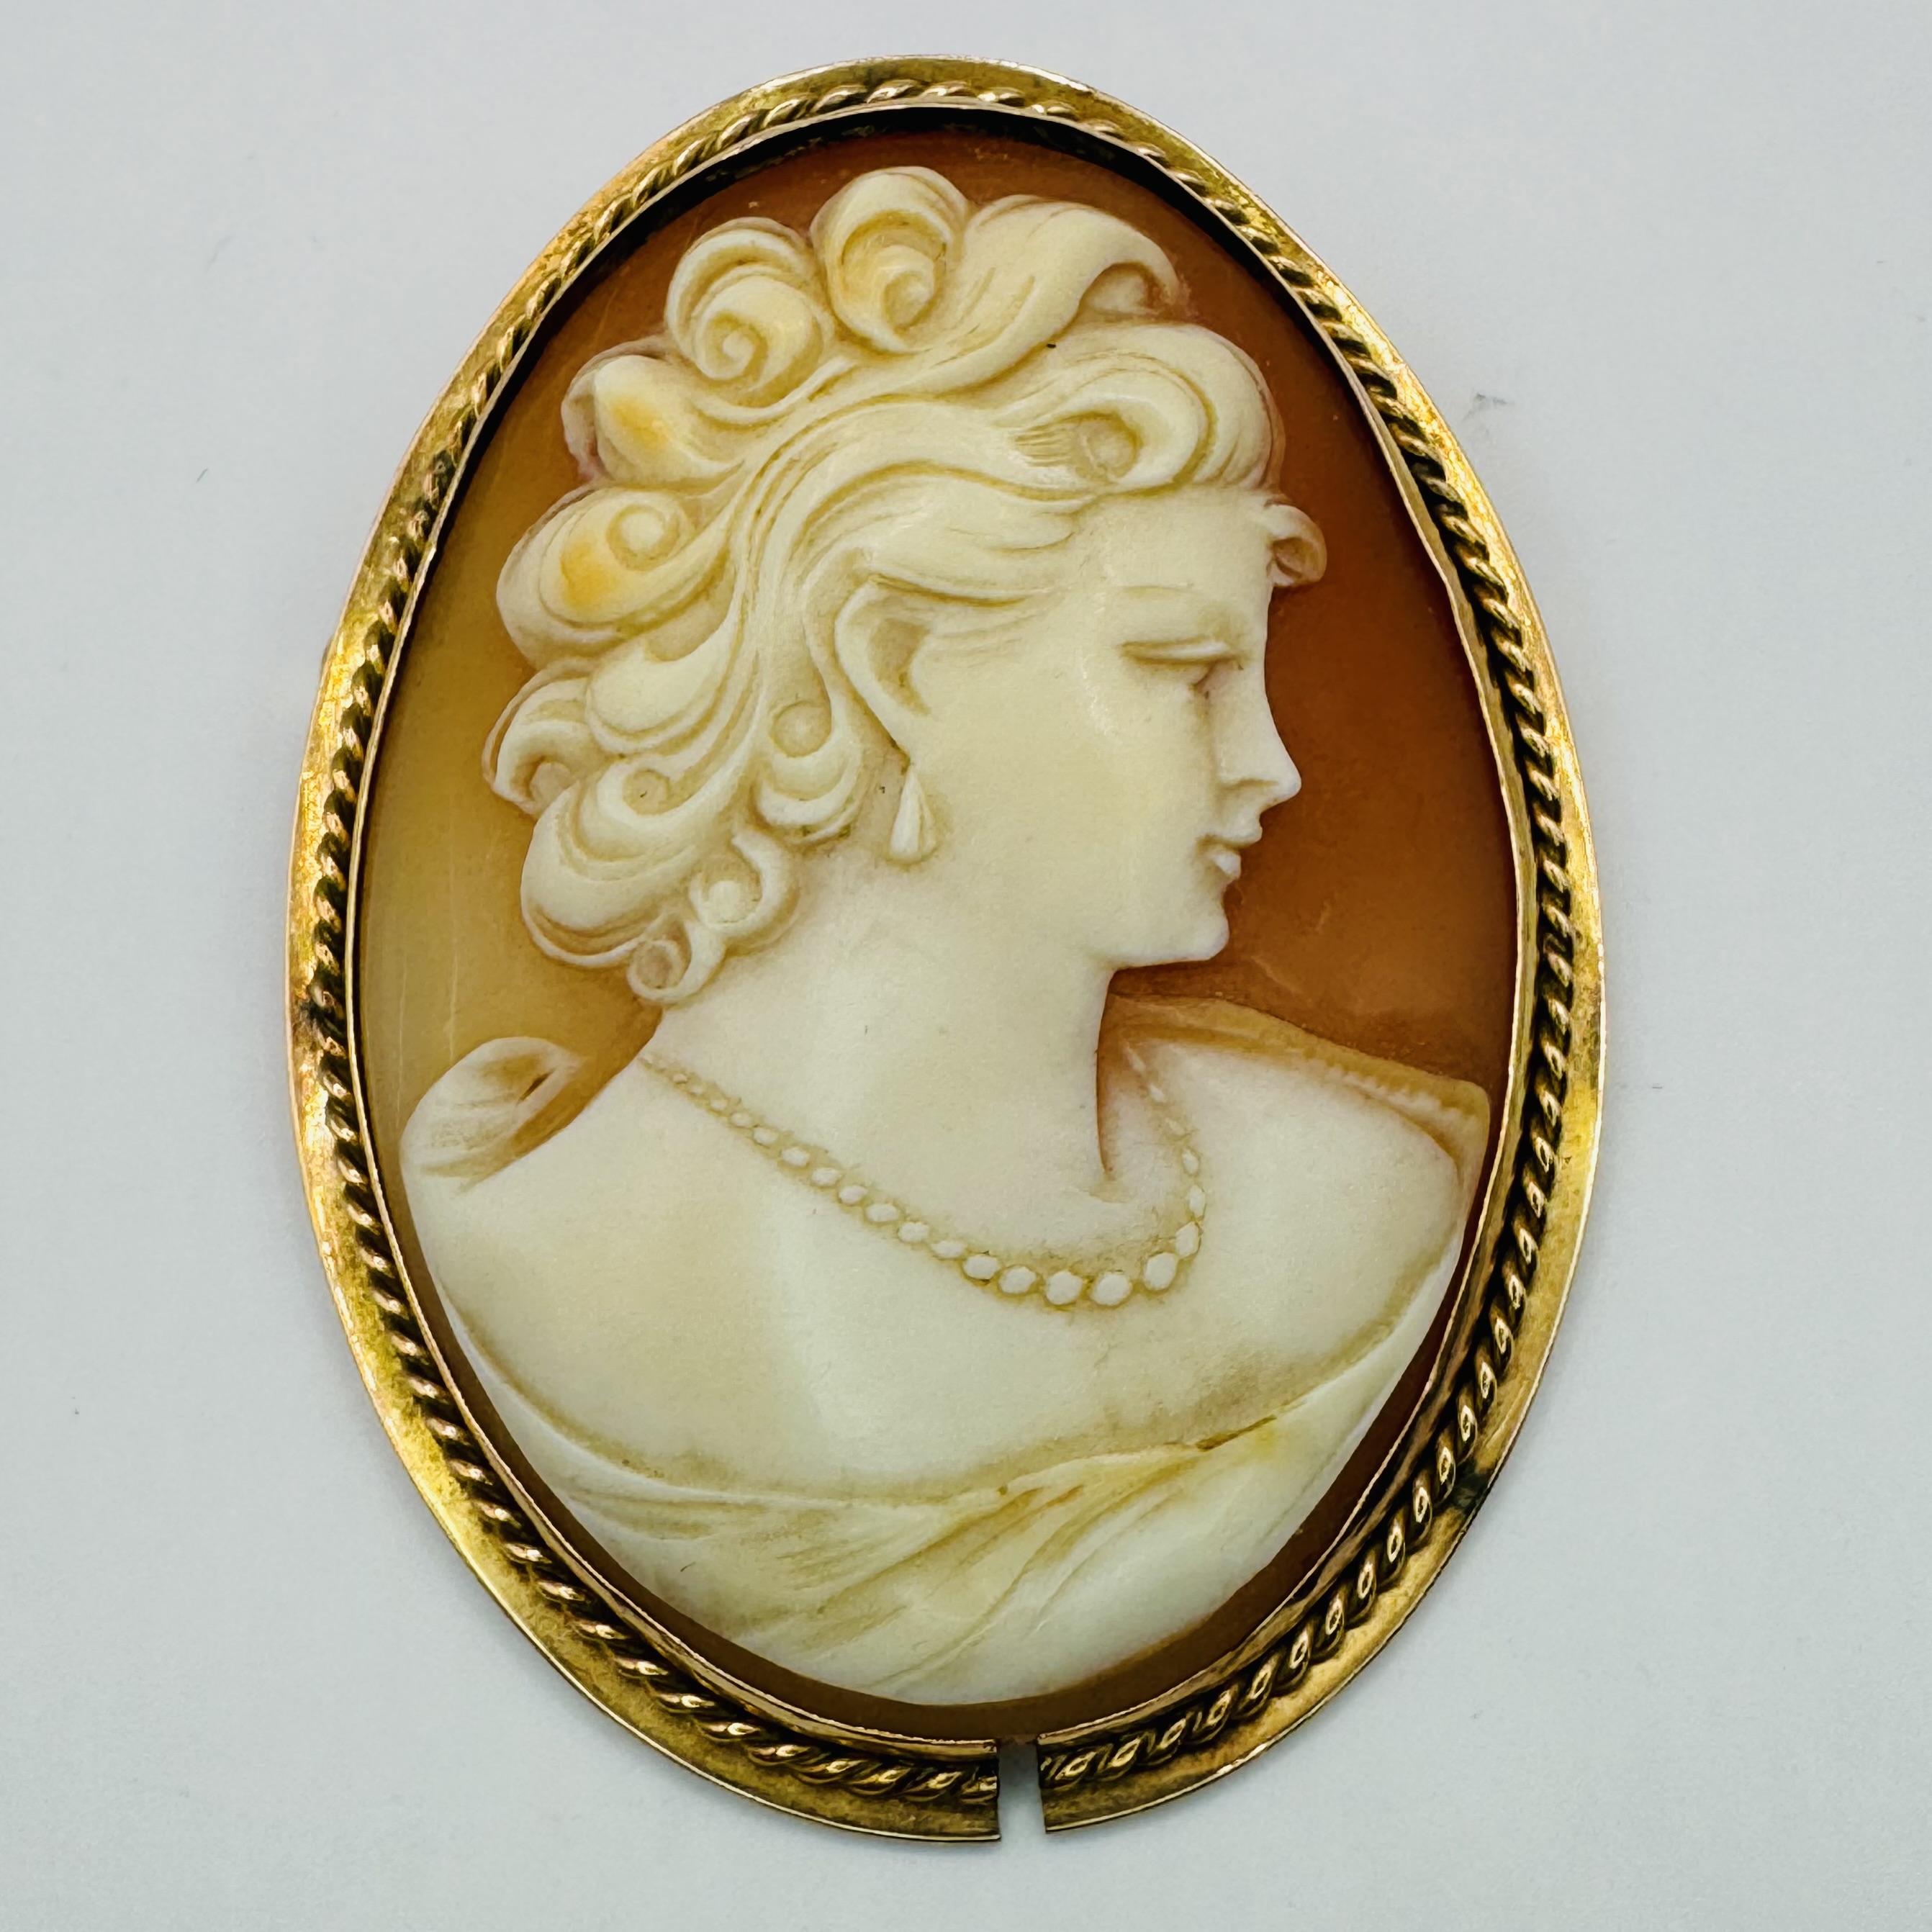 A shell cameo brooch/pendant, stamped "14K" in yellow precious metal. The cameo features the